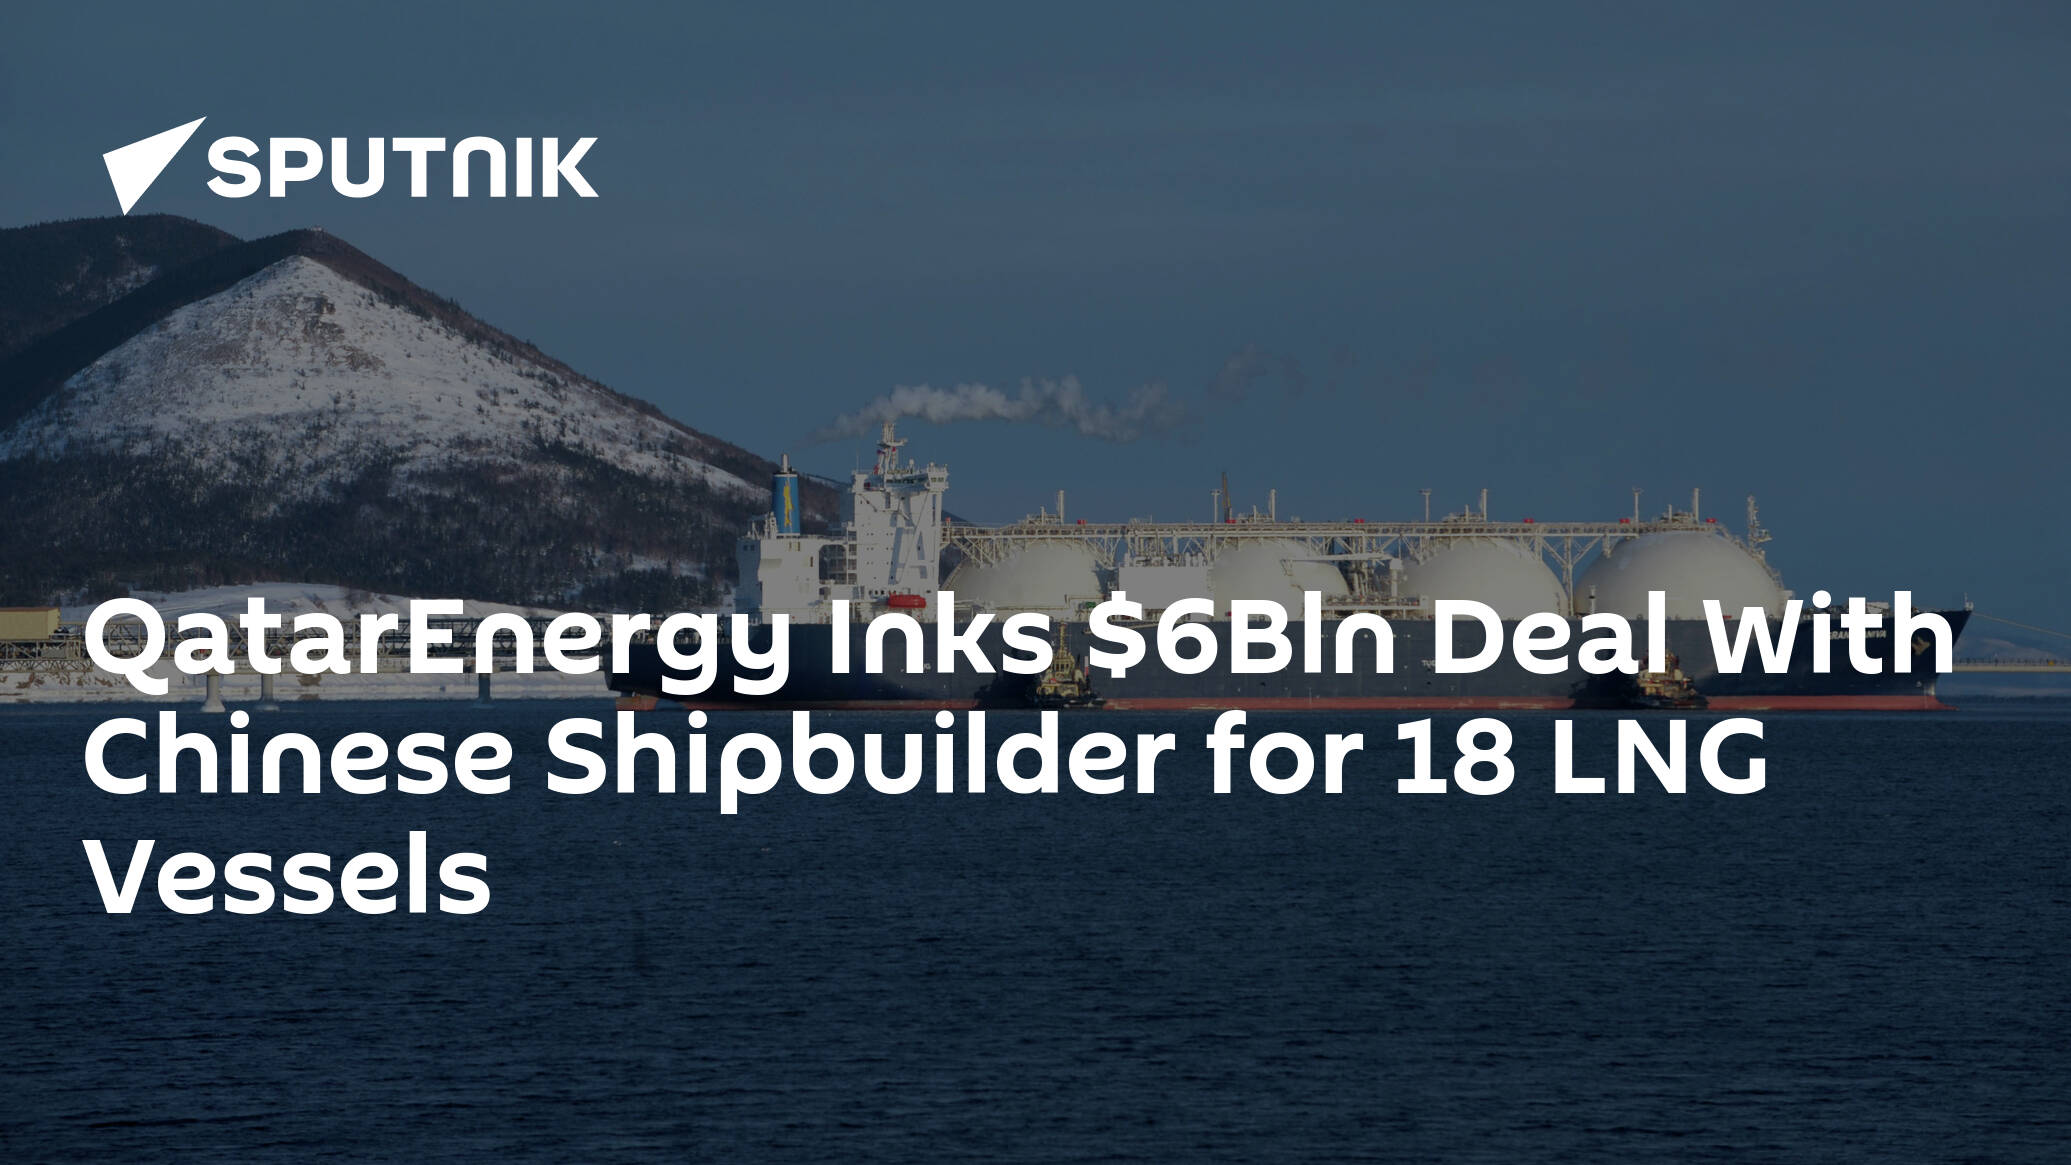 QatarEnergy Inks Bln Deal With Chinese Shipbuilder for 18 LNG Vessels